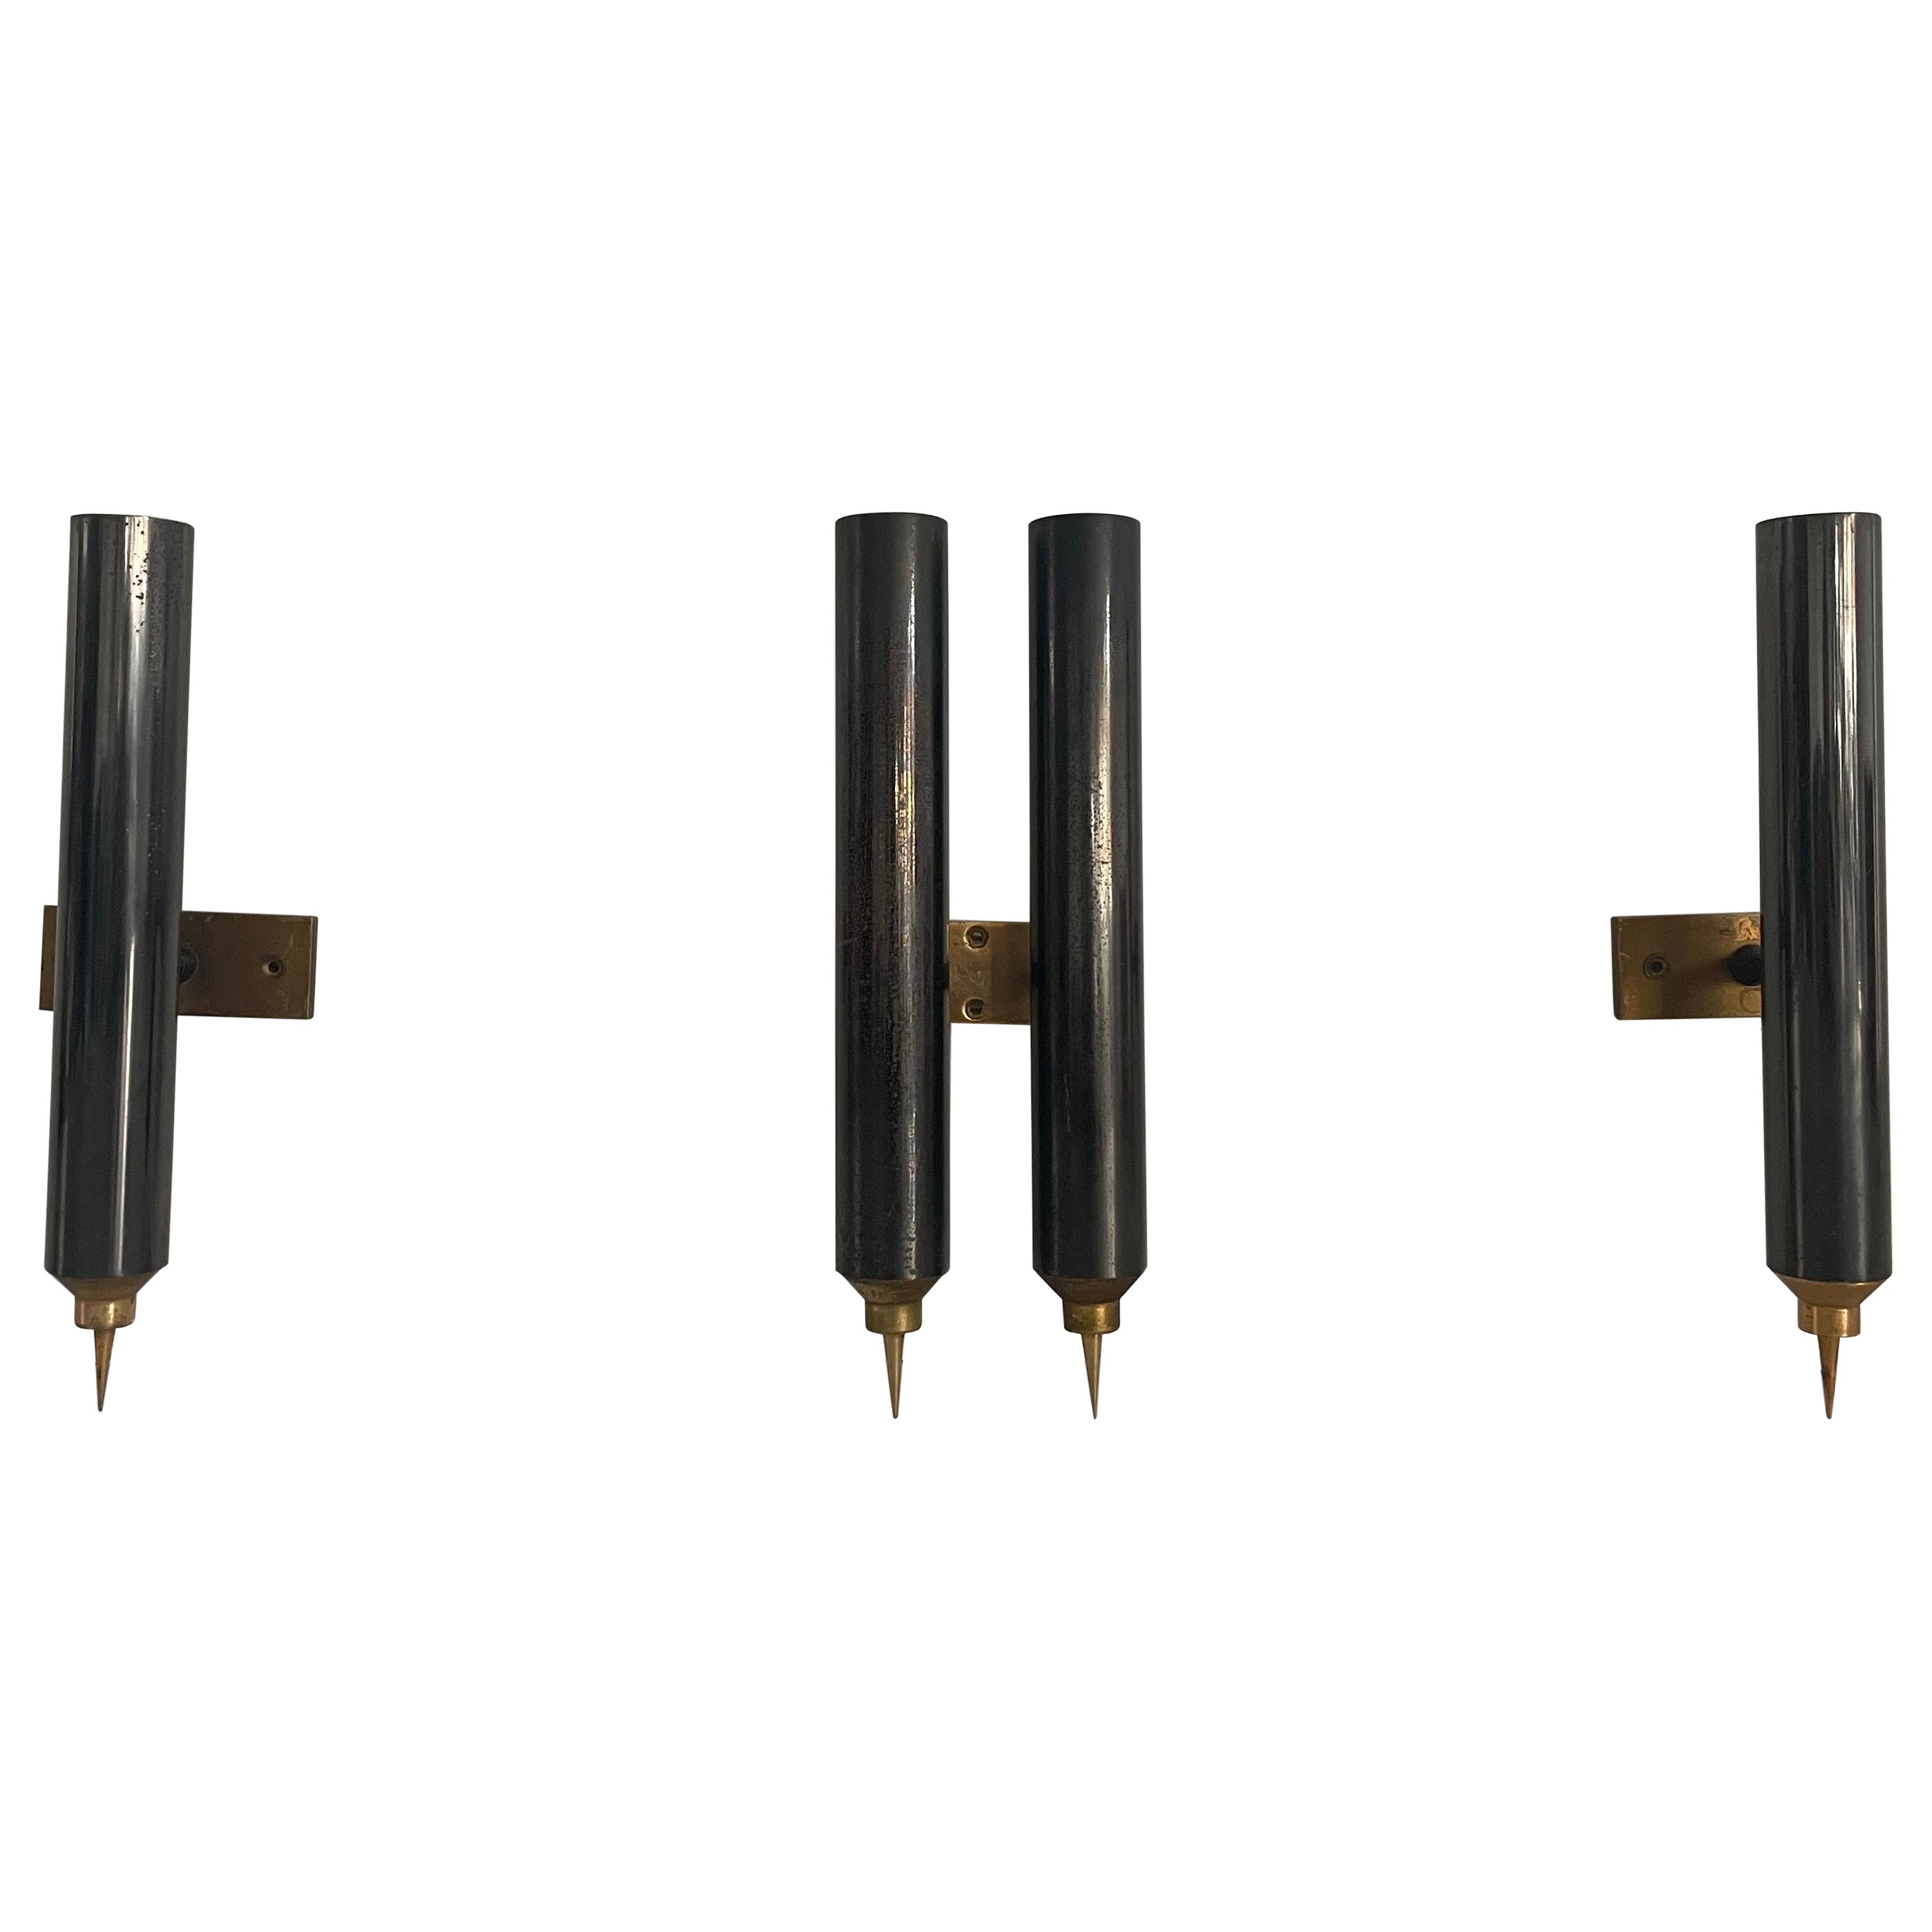 Set of 3 Modernist Tube Design Wall Sconces, 1960s, Italy